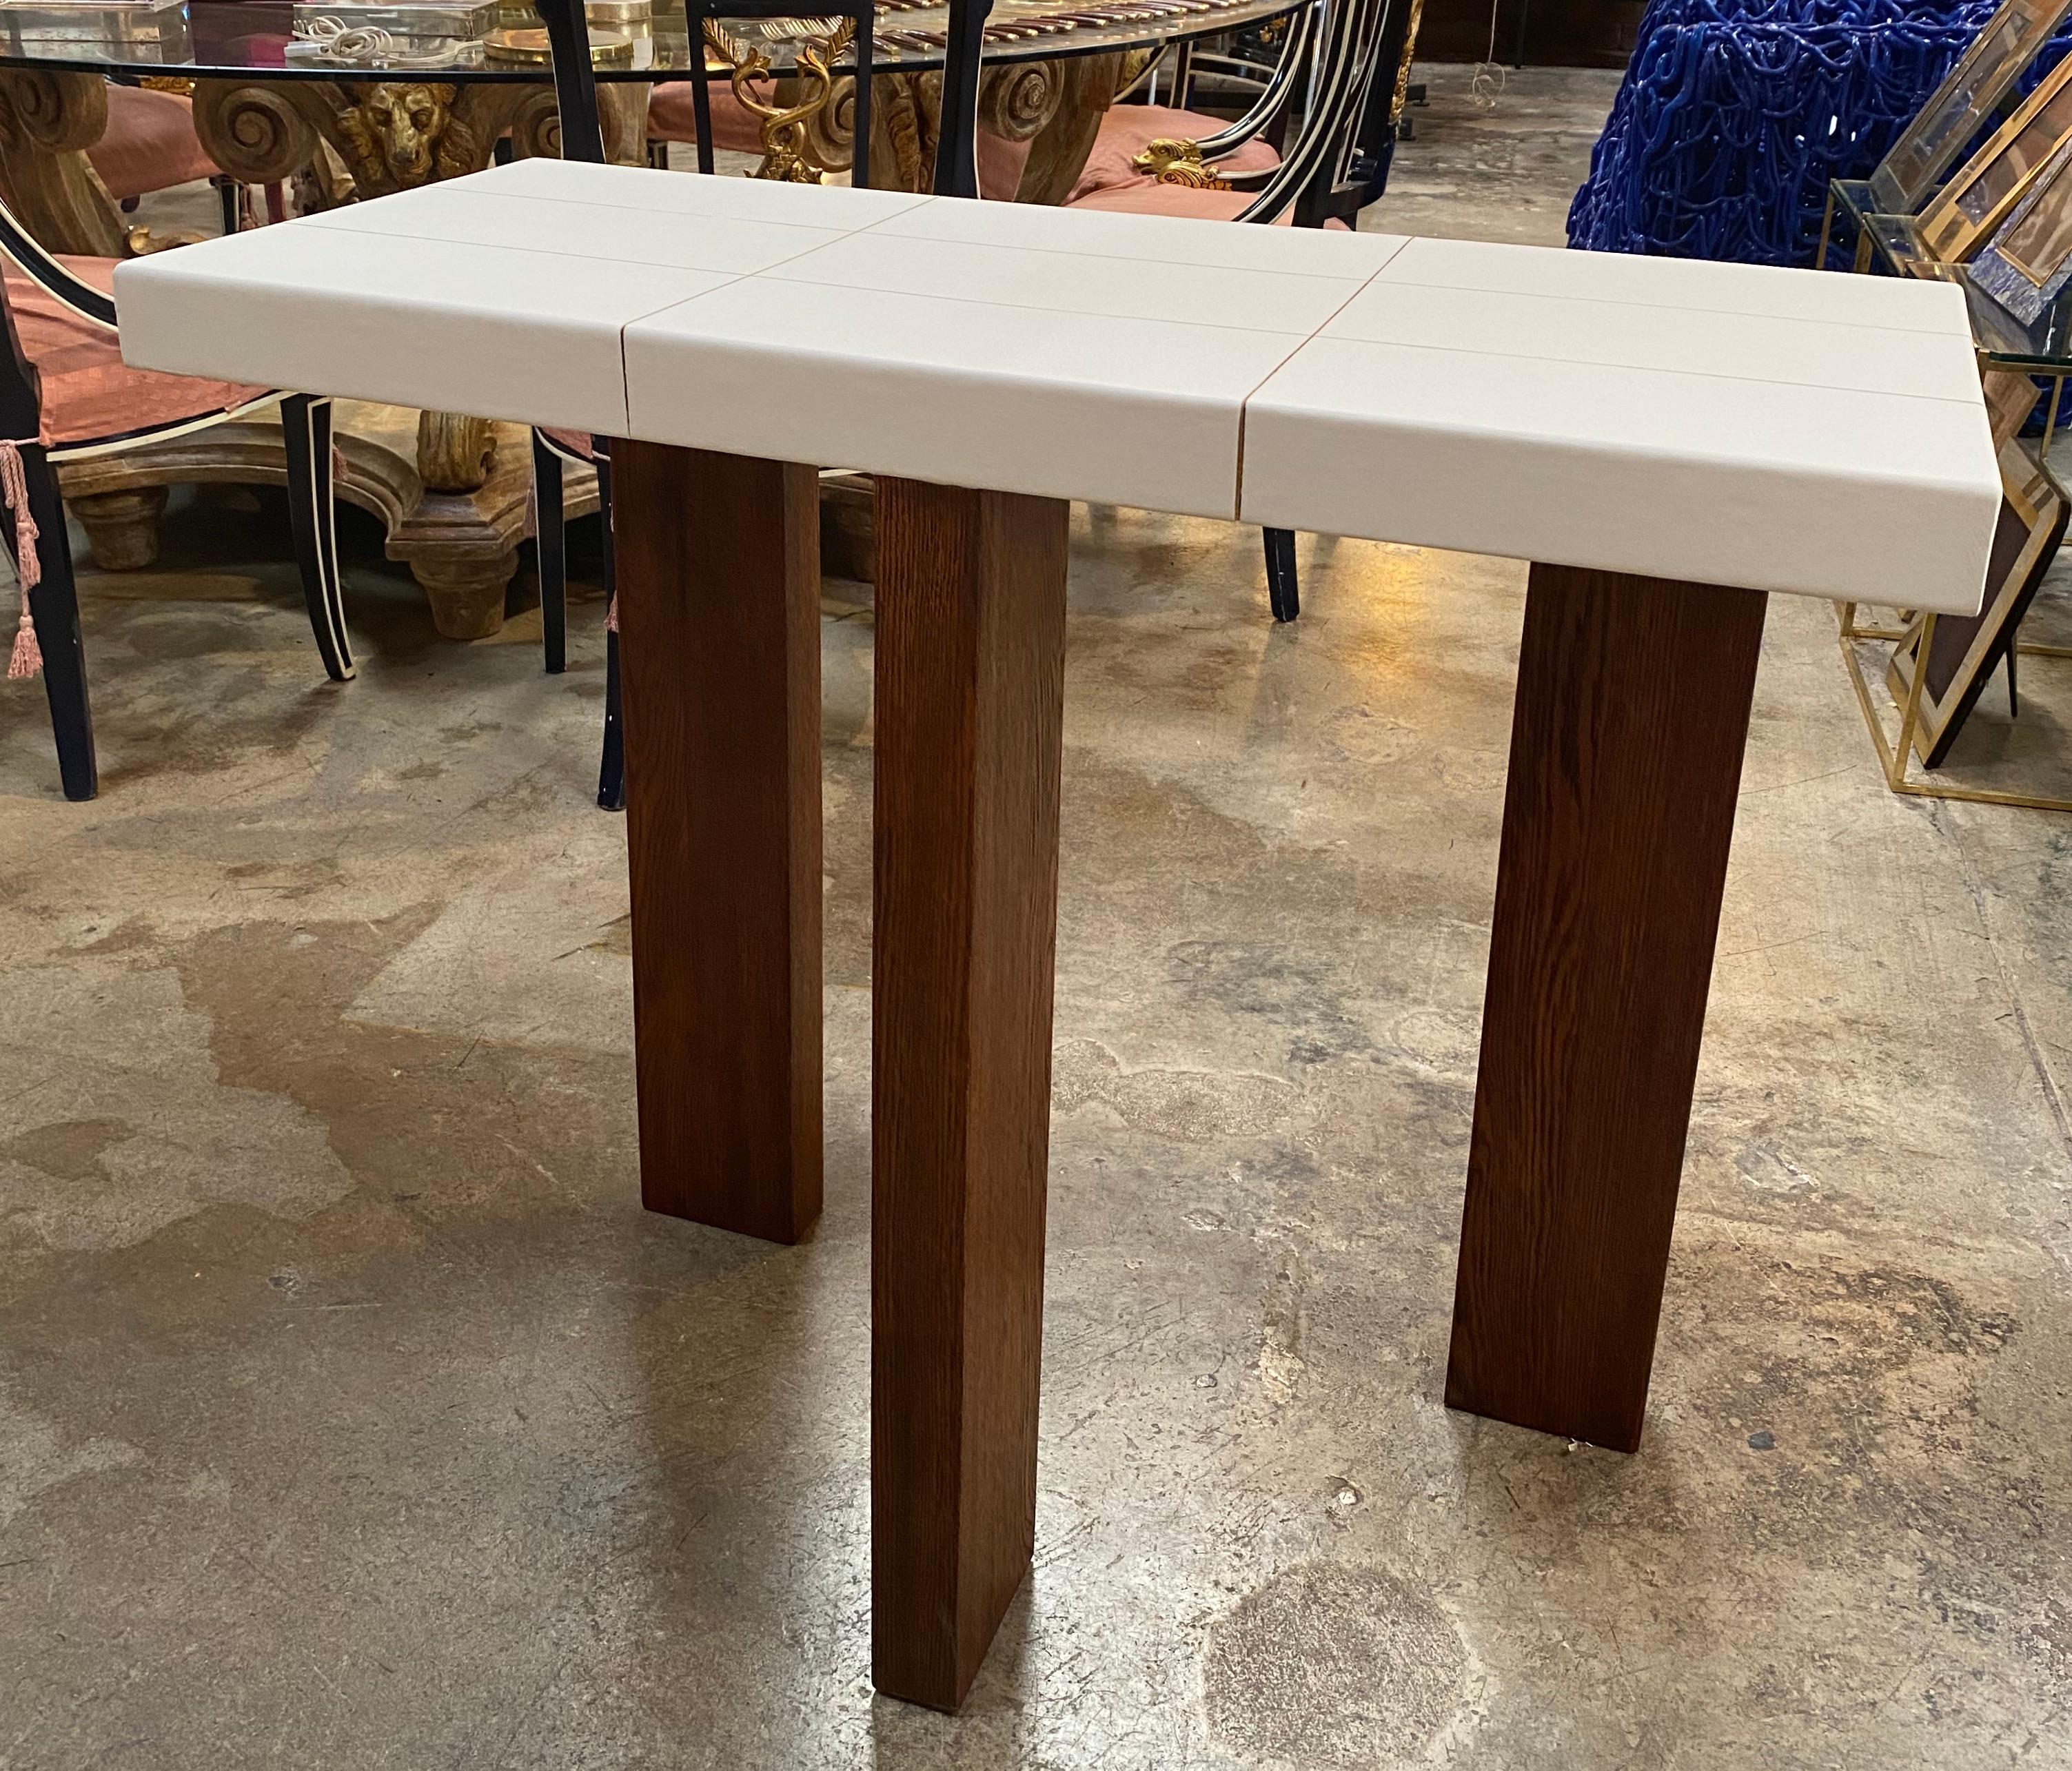 An elegant and sober Italian 21st century modern neoclassical three-legged tables from Italy. The structure is composed of solid walnut wood with an rectangular top gently with parchment base cantilevered over an rectangular apron which rests on